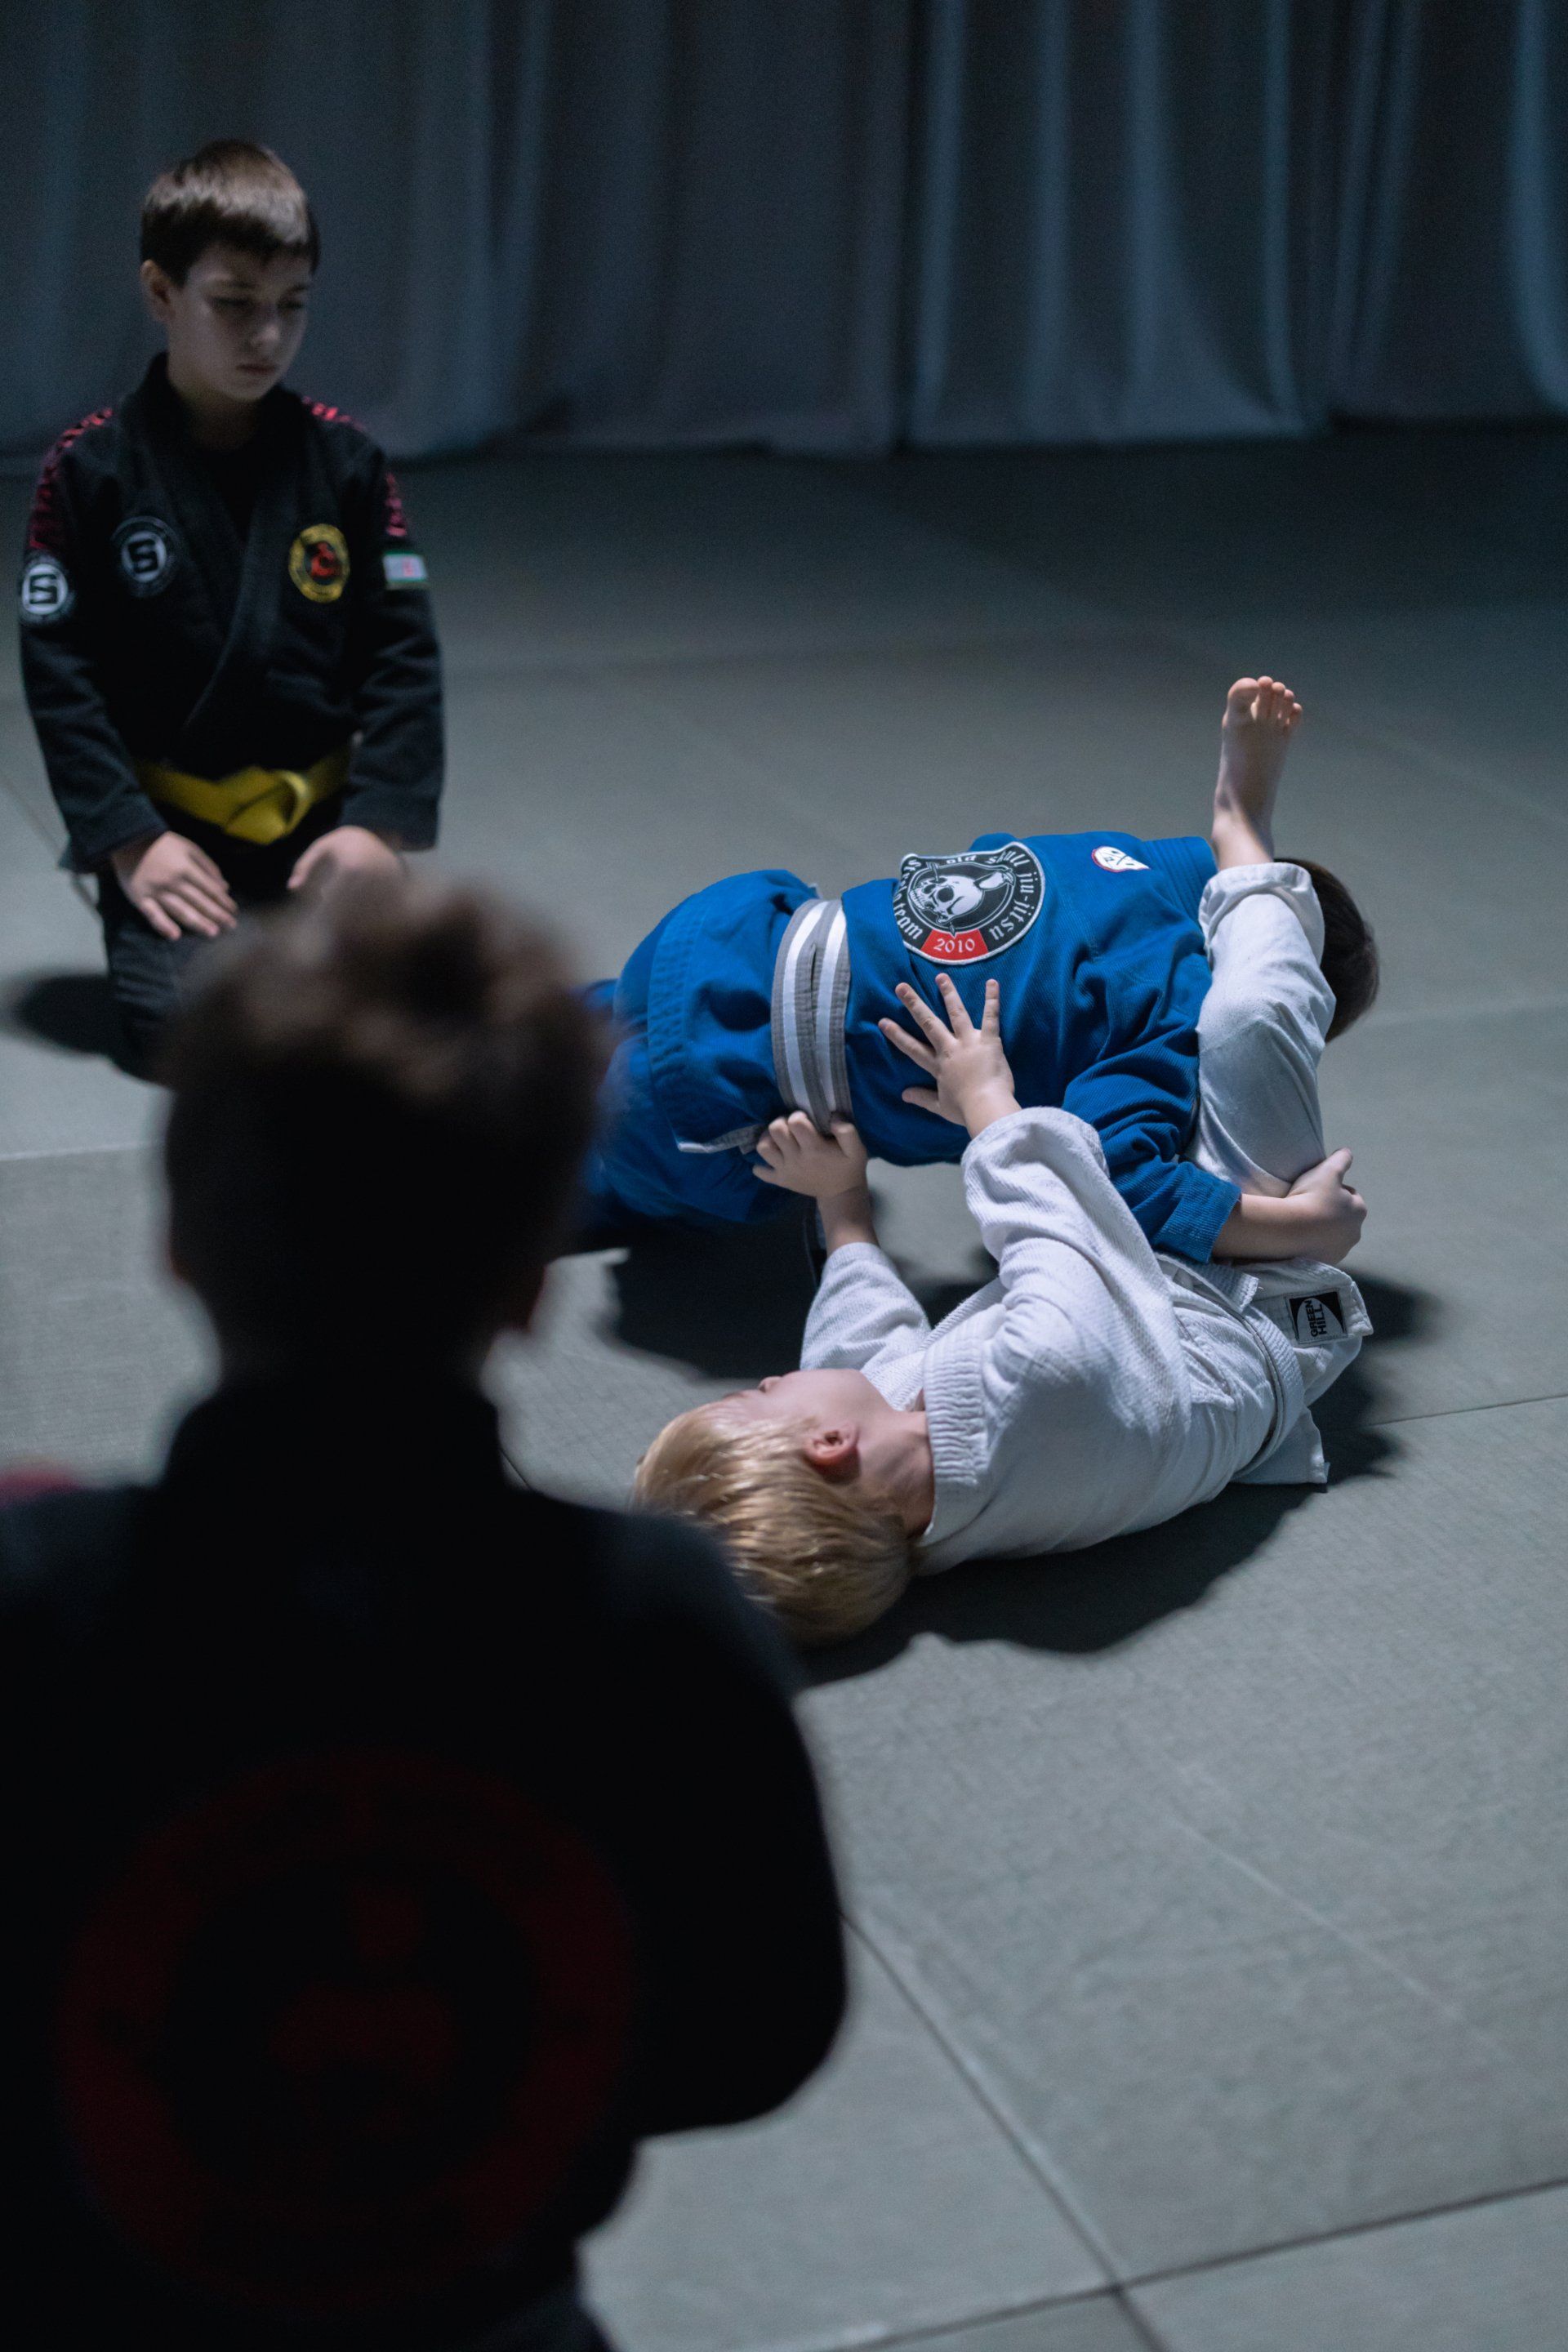 A group of young boys are practicing jiu jitsu in a gym.